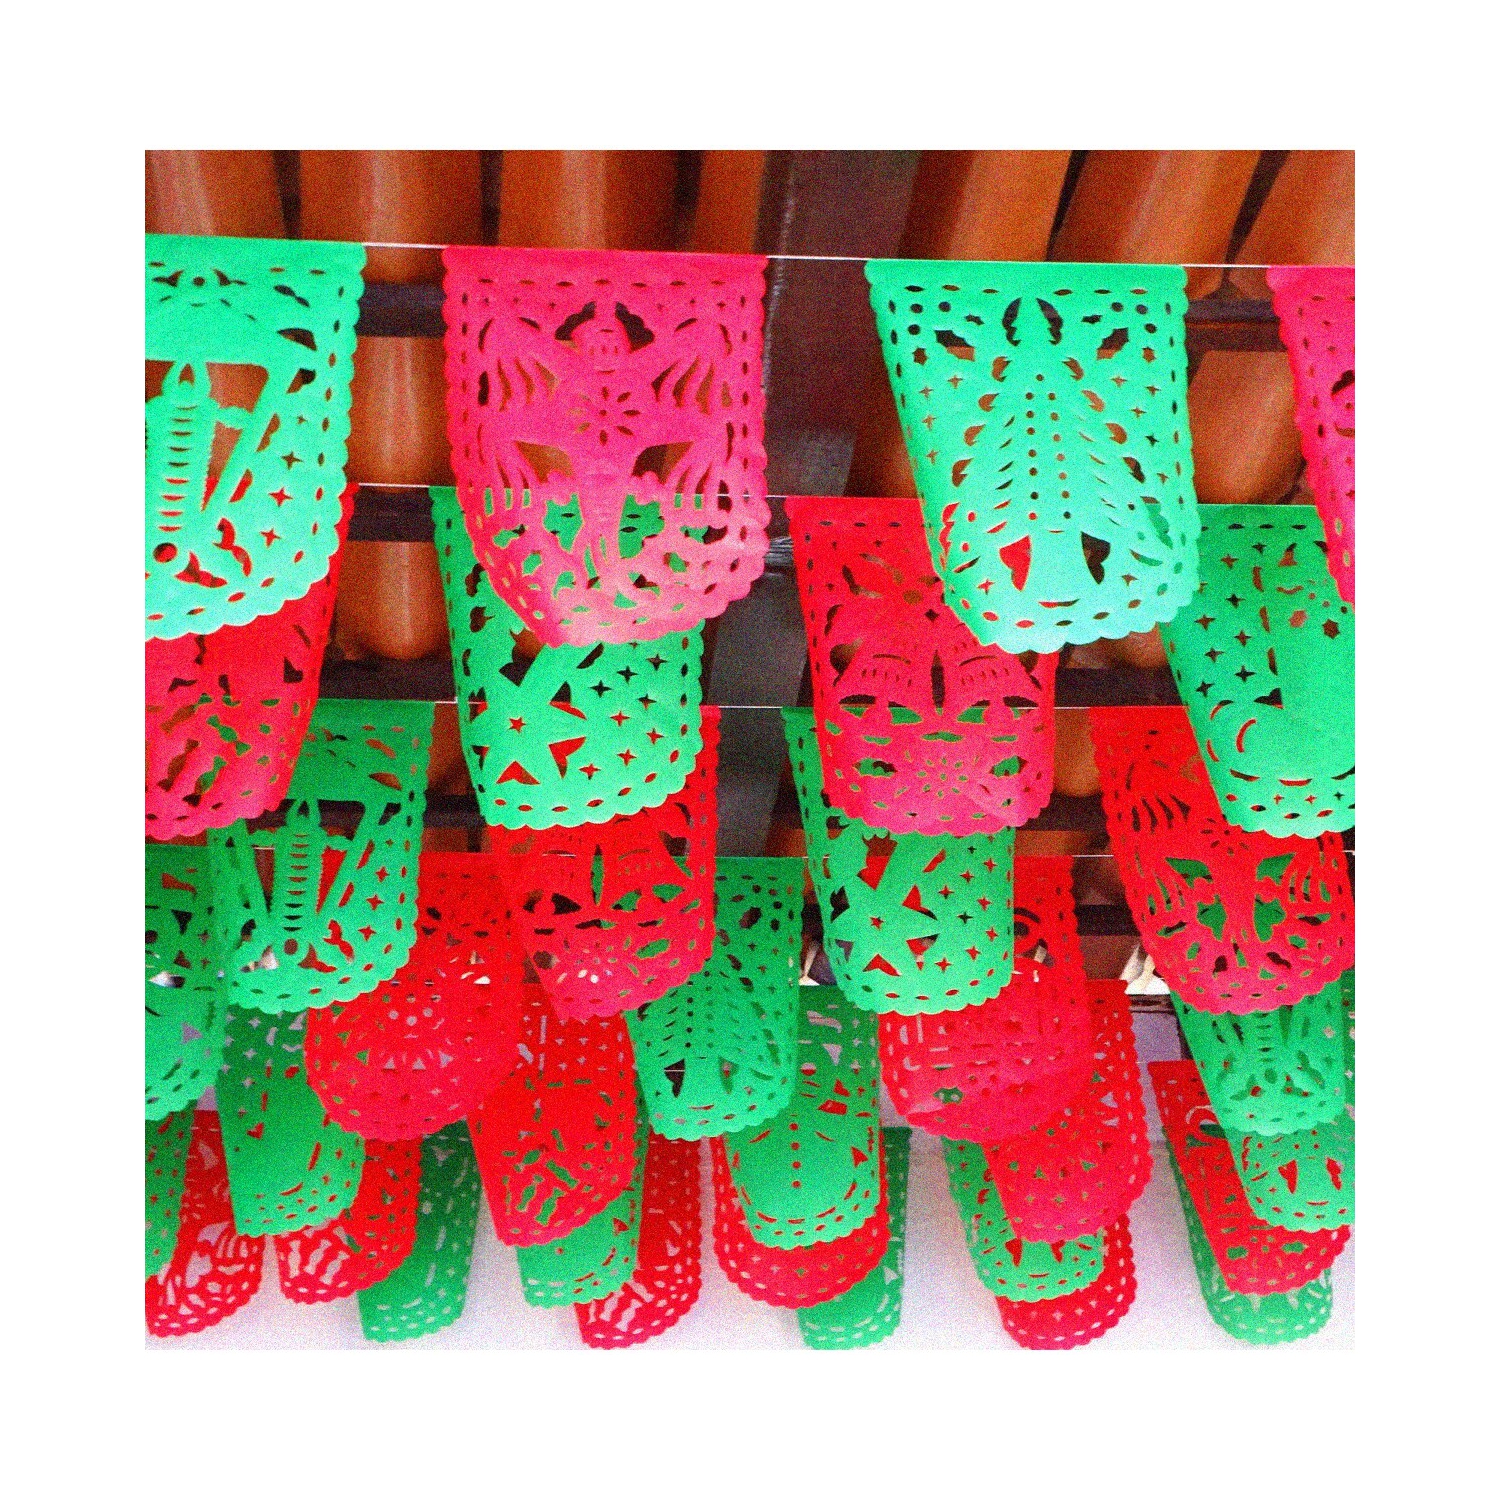 Fiesta Frenzy: 5 Pk Feliz Navidad Papel Picado Flags - Vibrant Red and Green Spanish Party Decorations! 50 Tissue Paper Flags, Over 60ft Long! WS12